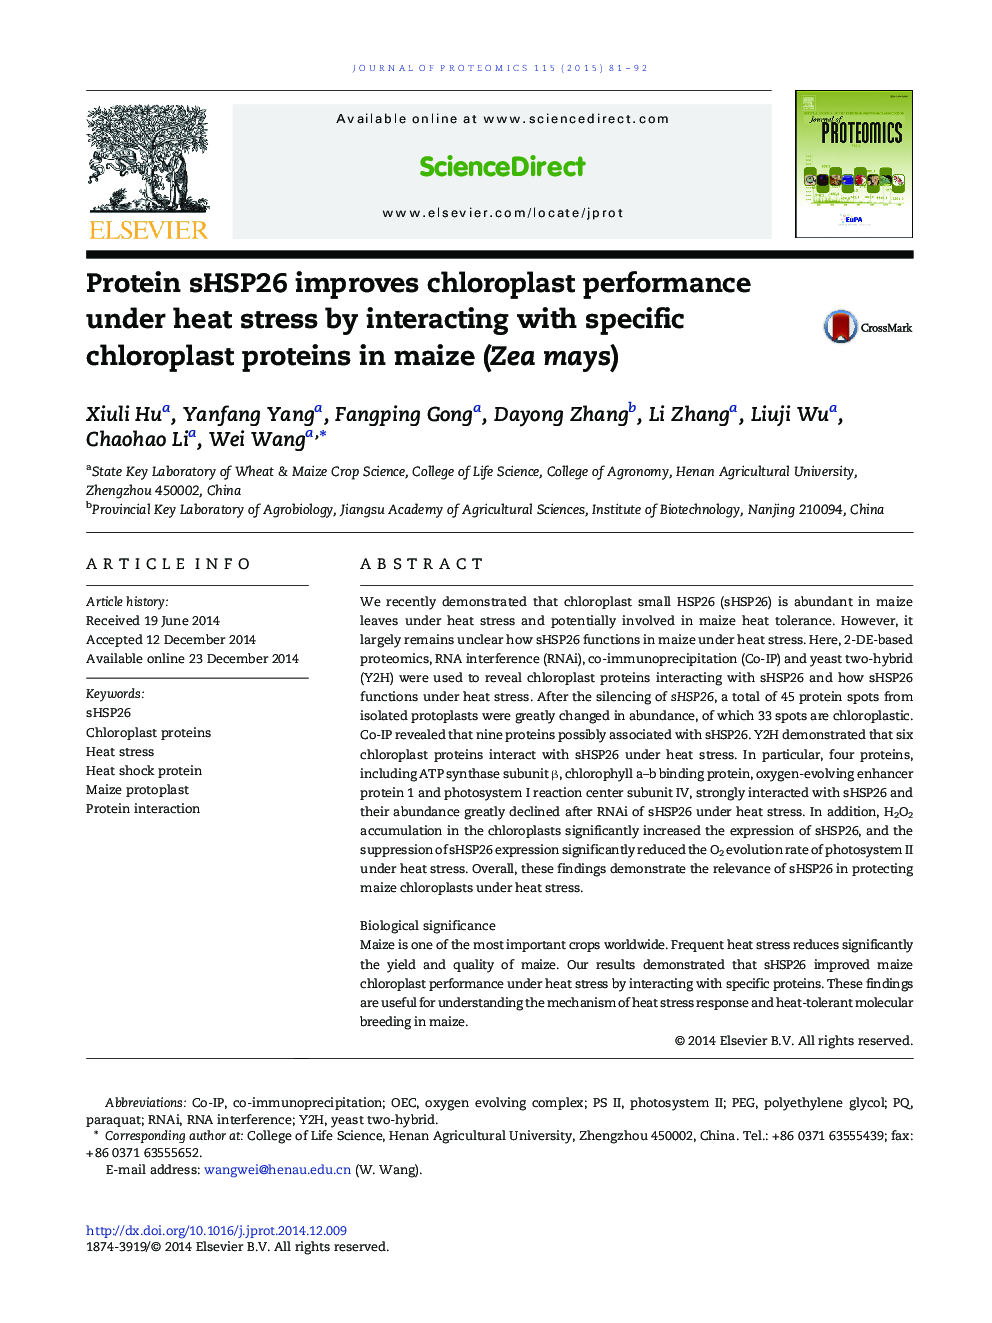 Protein sHSP26 improves chloroplast performance under heat stress by interacting with specific chloroplast proteins in maize (Zea mays)